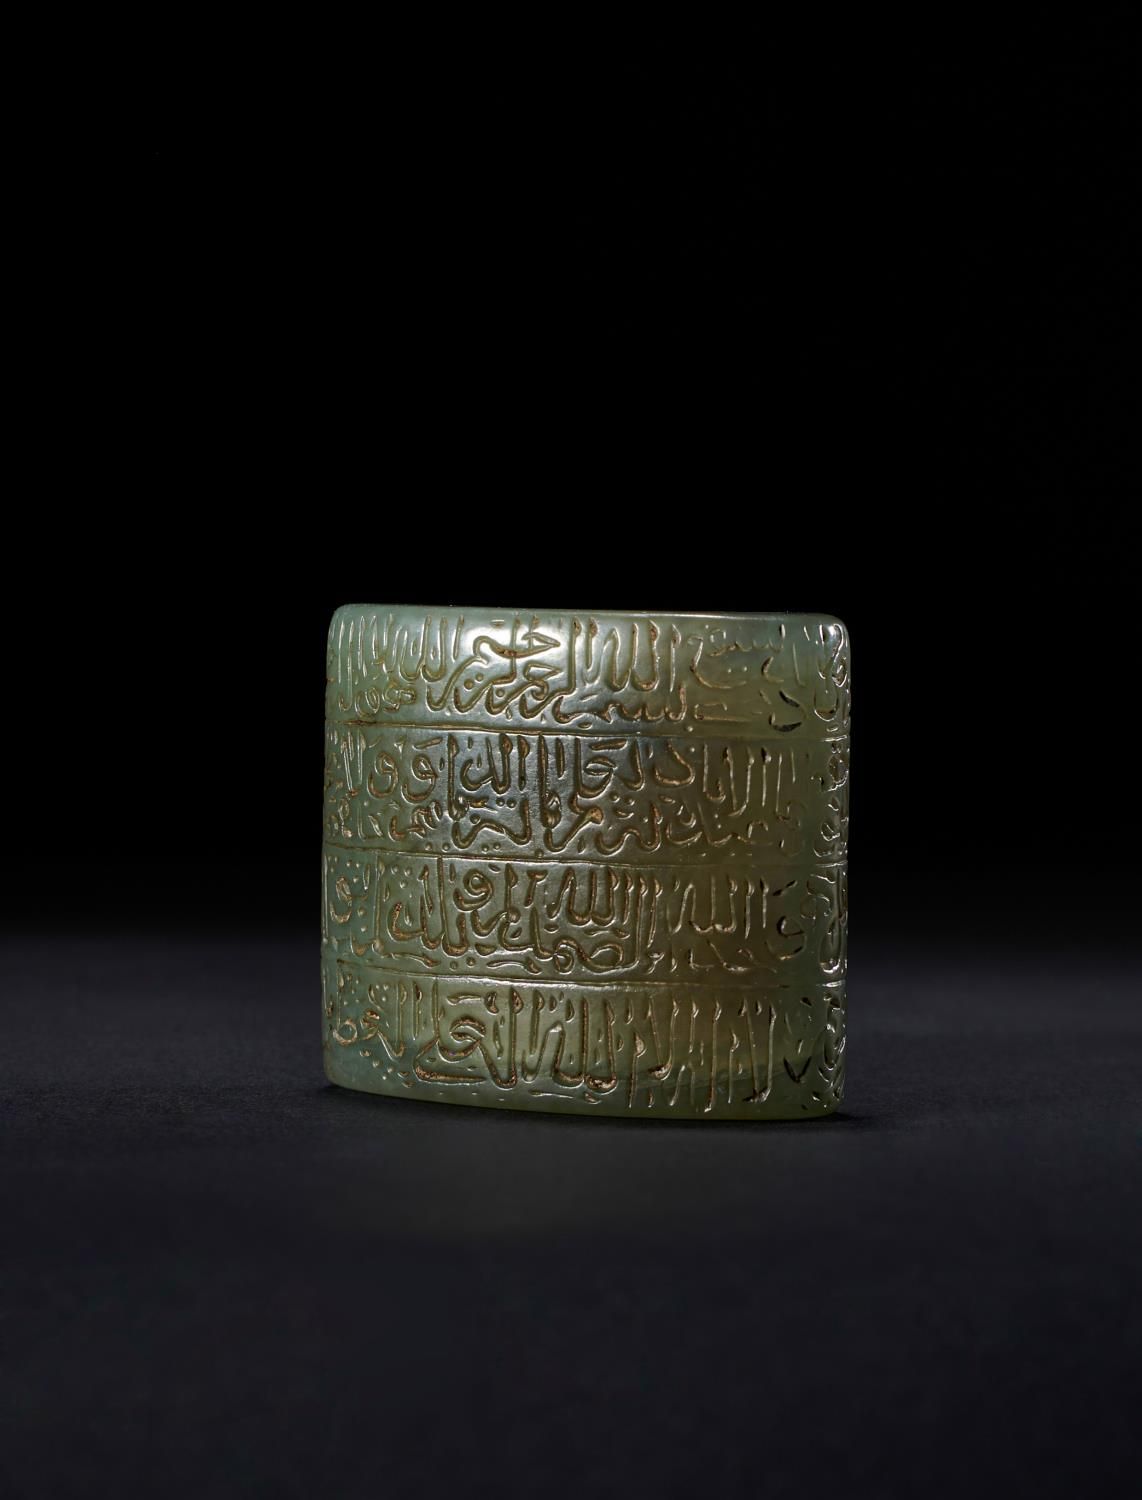 A RARE CALLIGRAPHIC INSCRIBED JADE INKWELL, 18TH CENTURY, MUGHAL, INDIA EIN SELT&hellip;